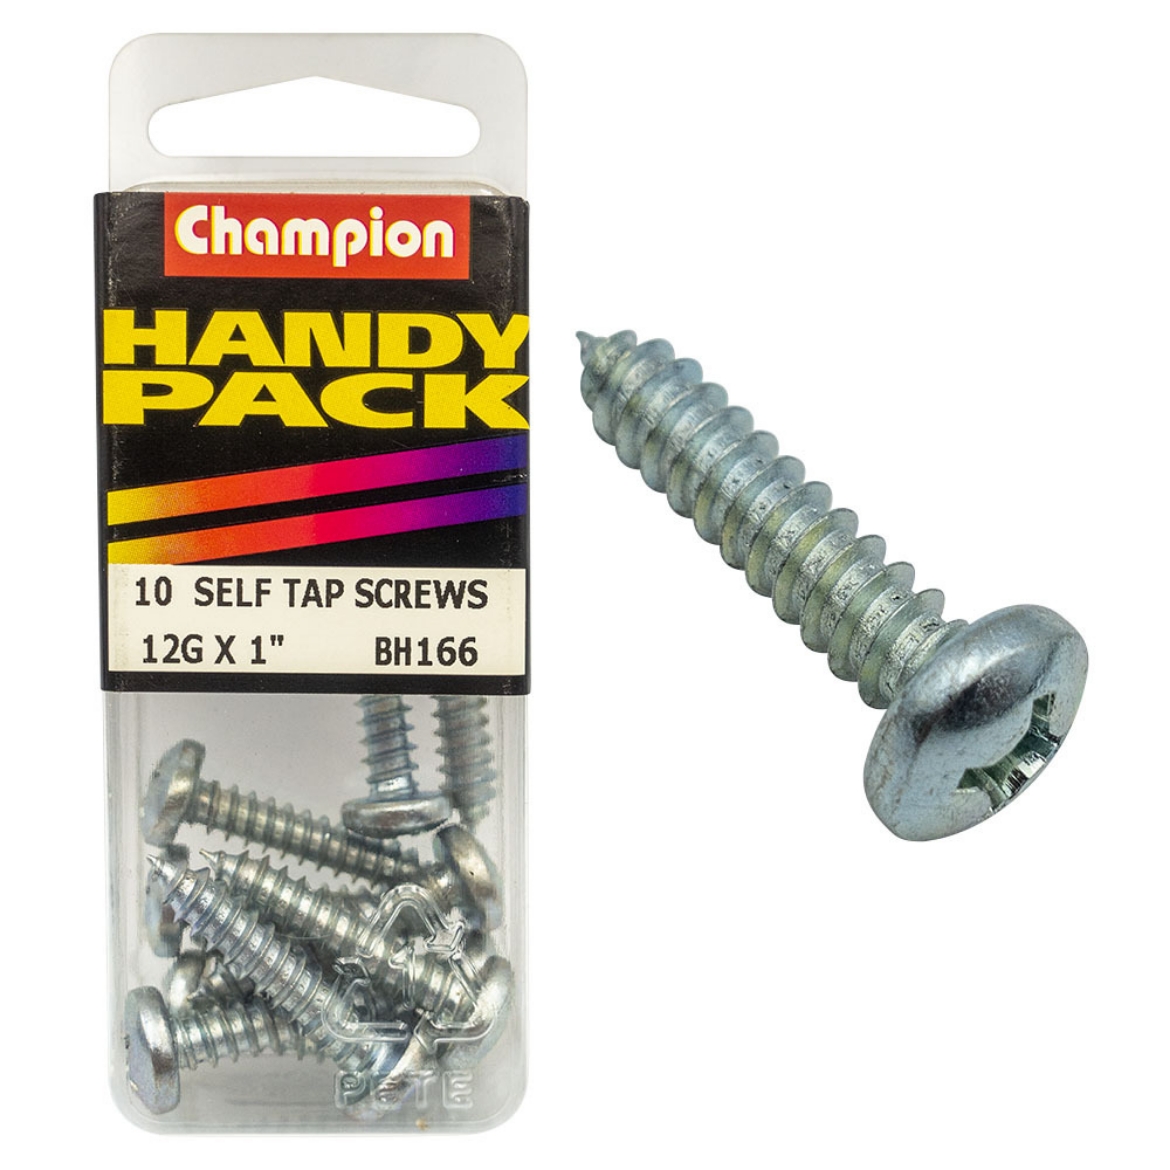 Picture of Handy Pk Self Tap Screw pan head 12g x 1 CST (Pkt.10)